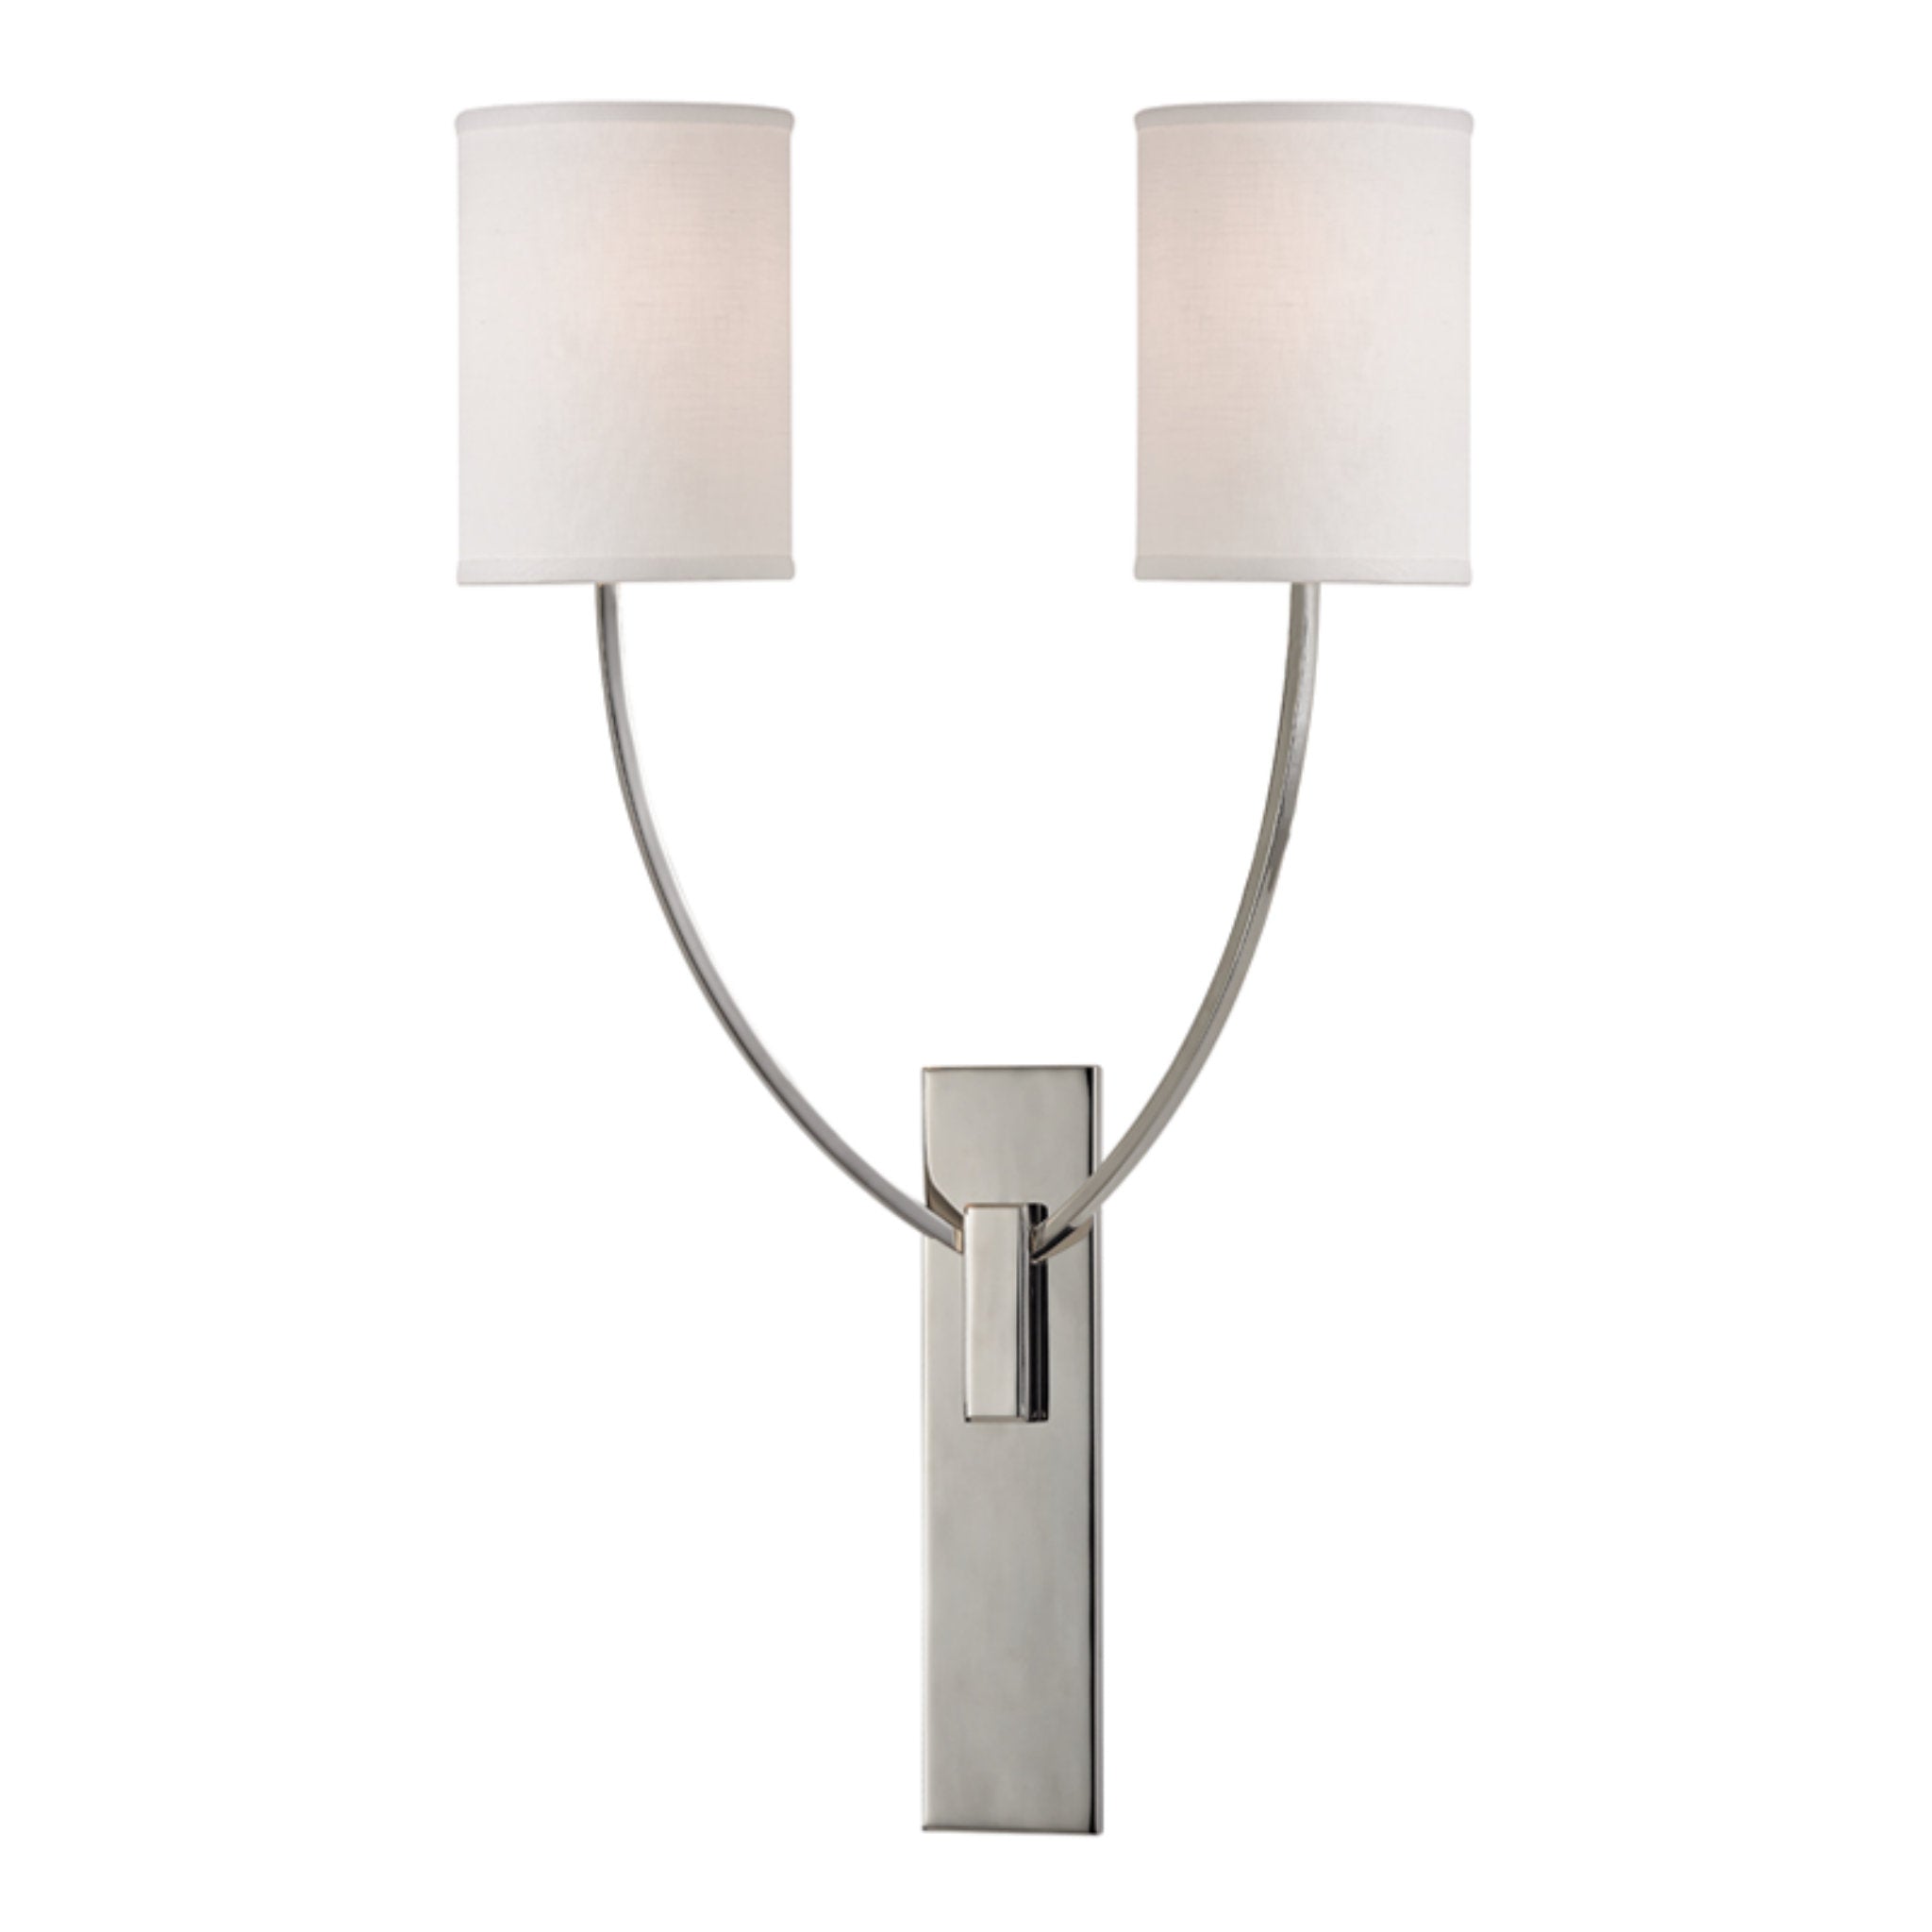 Colton 2 Light Wall Sconce in Polished Nickel